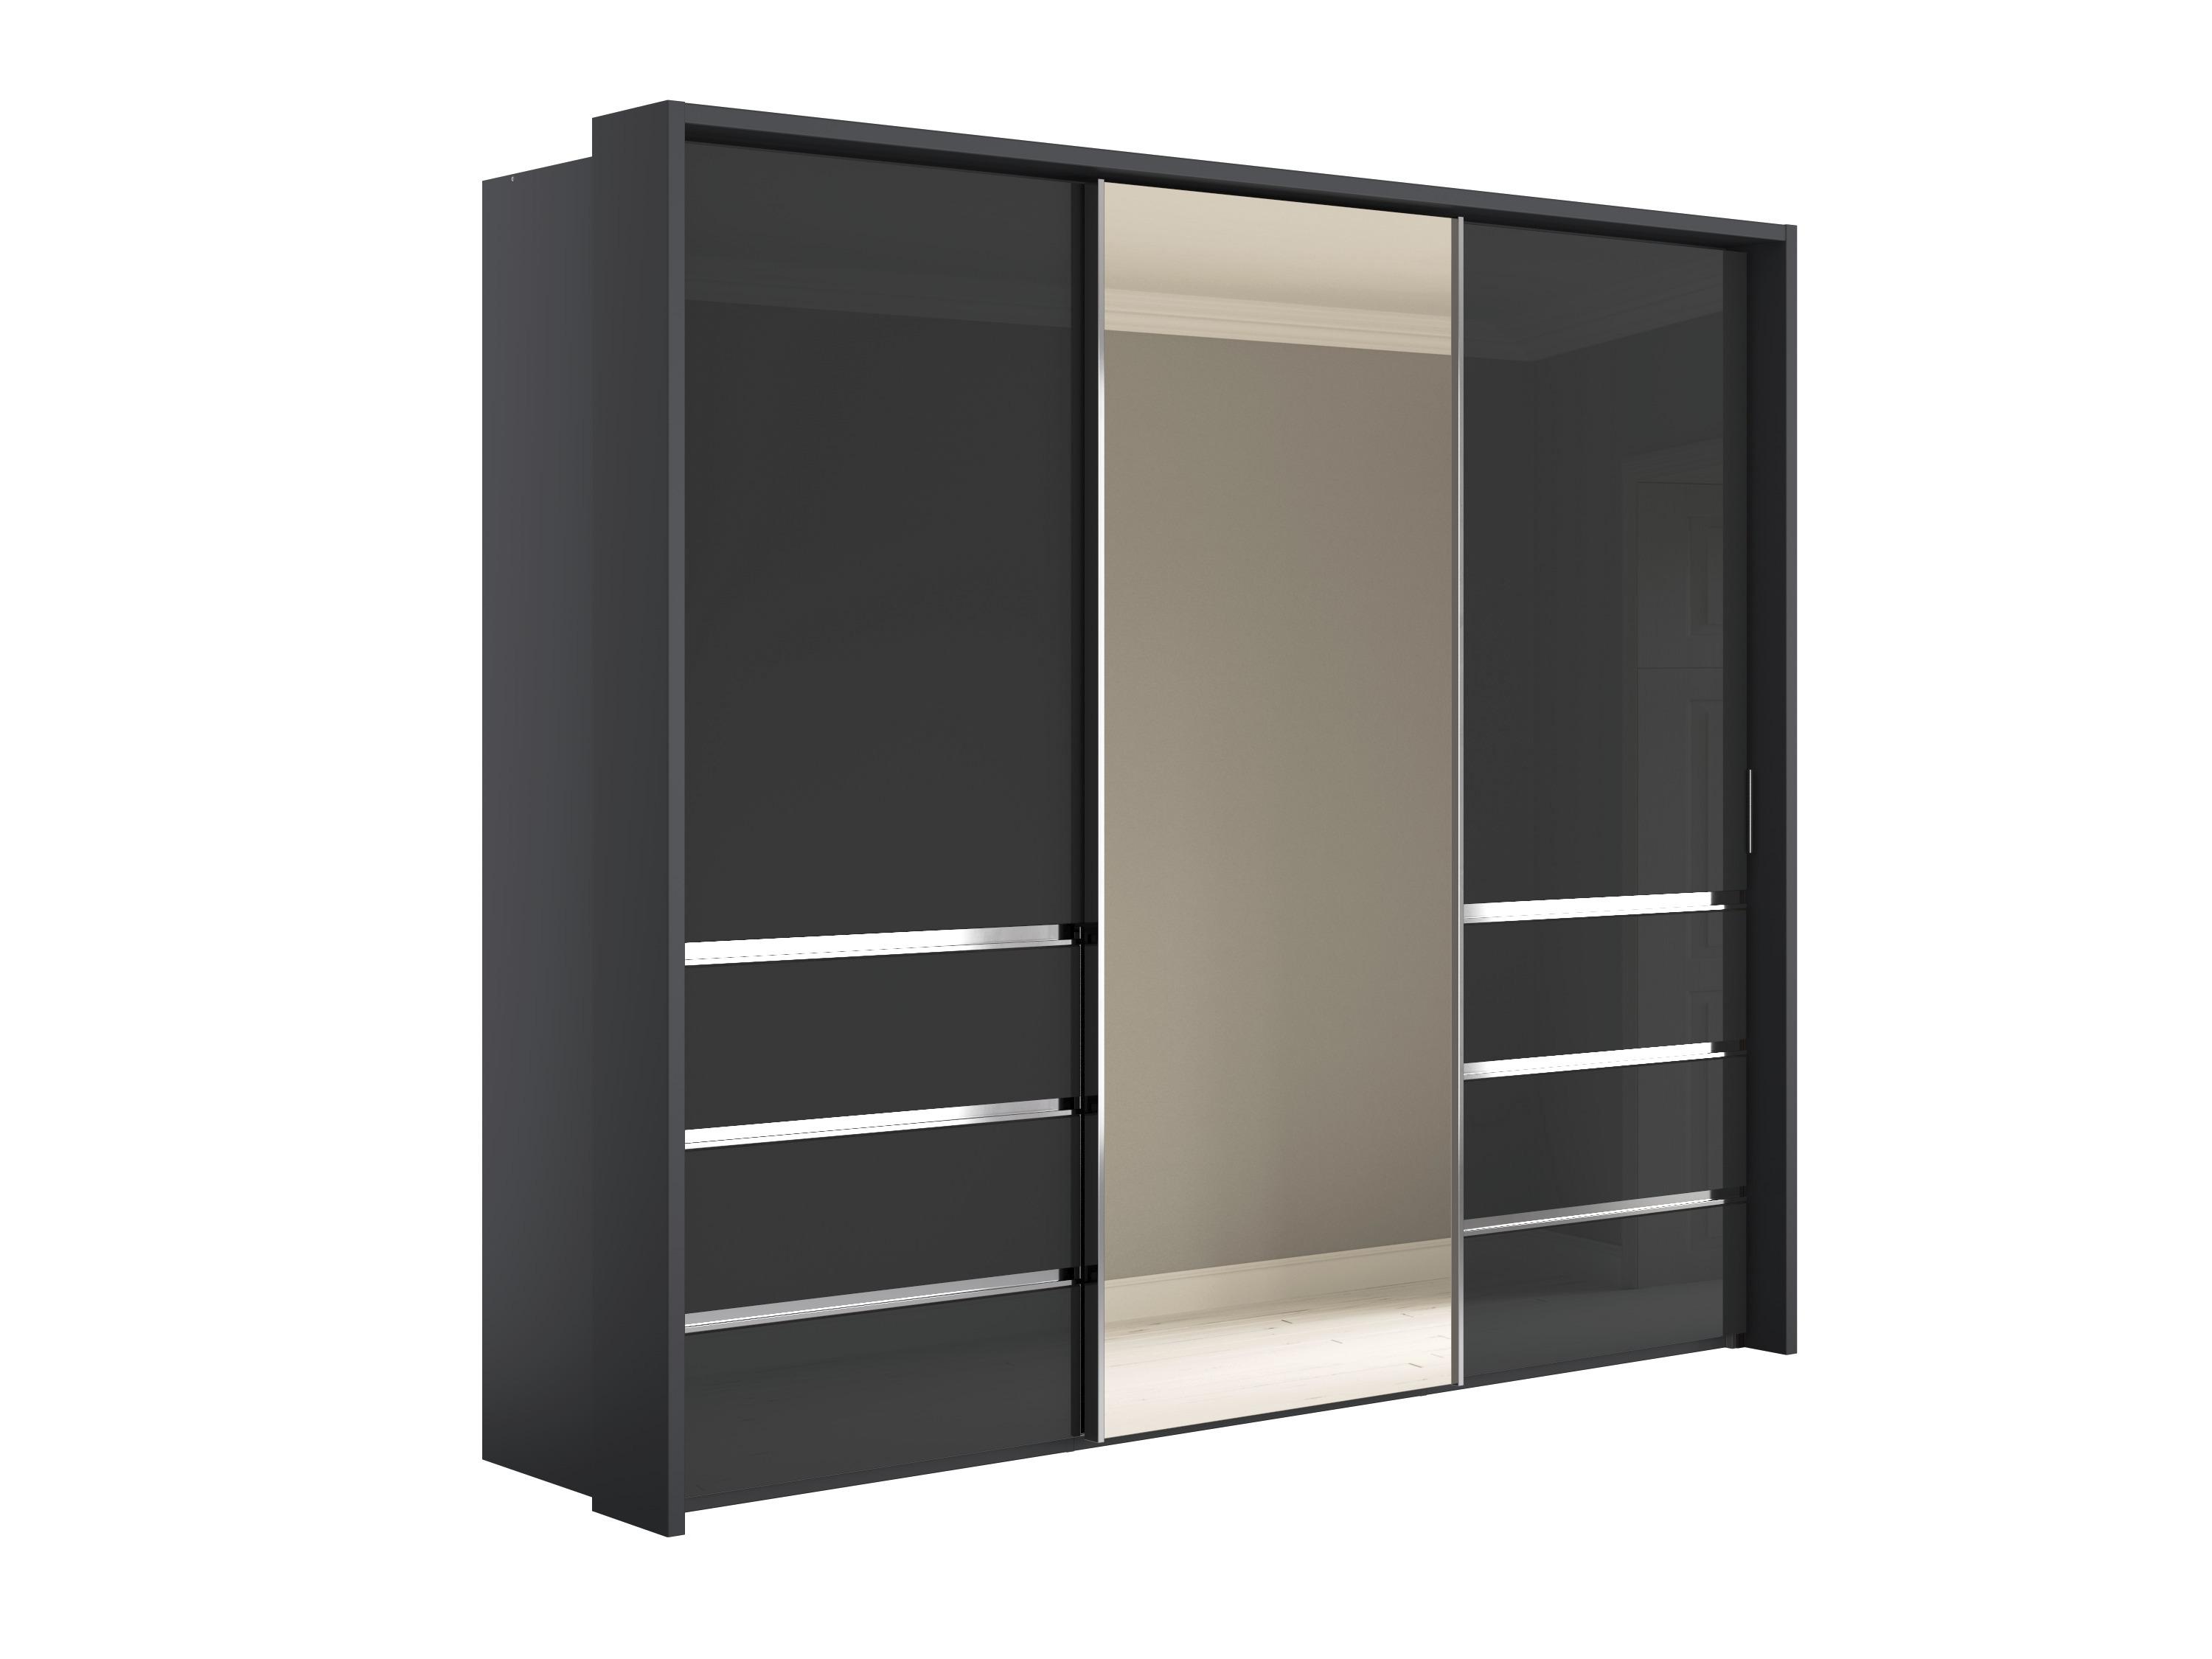 Pacifica 2 260cm 3 Door Sliding Wardrobe with Drawers at Left and Right and Centre Mirror Door in Graphite/Glass Graphite on Furniture Village